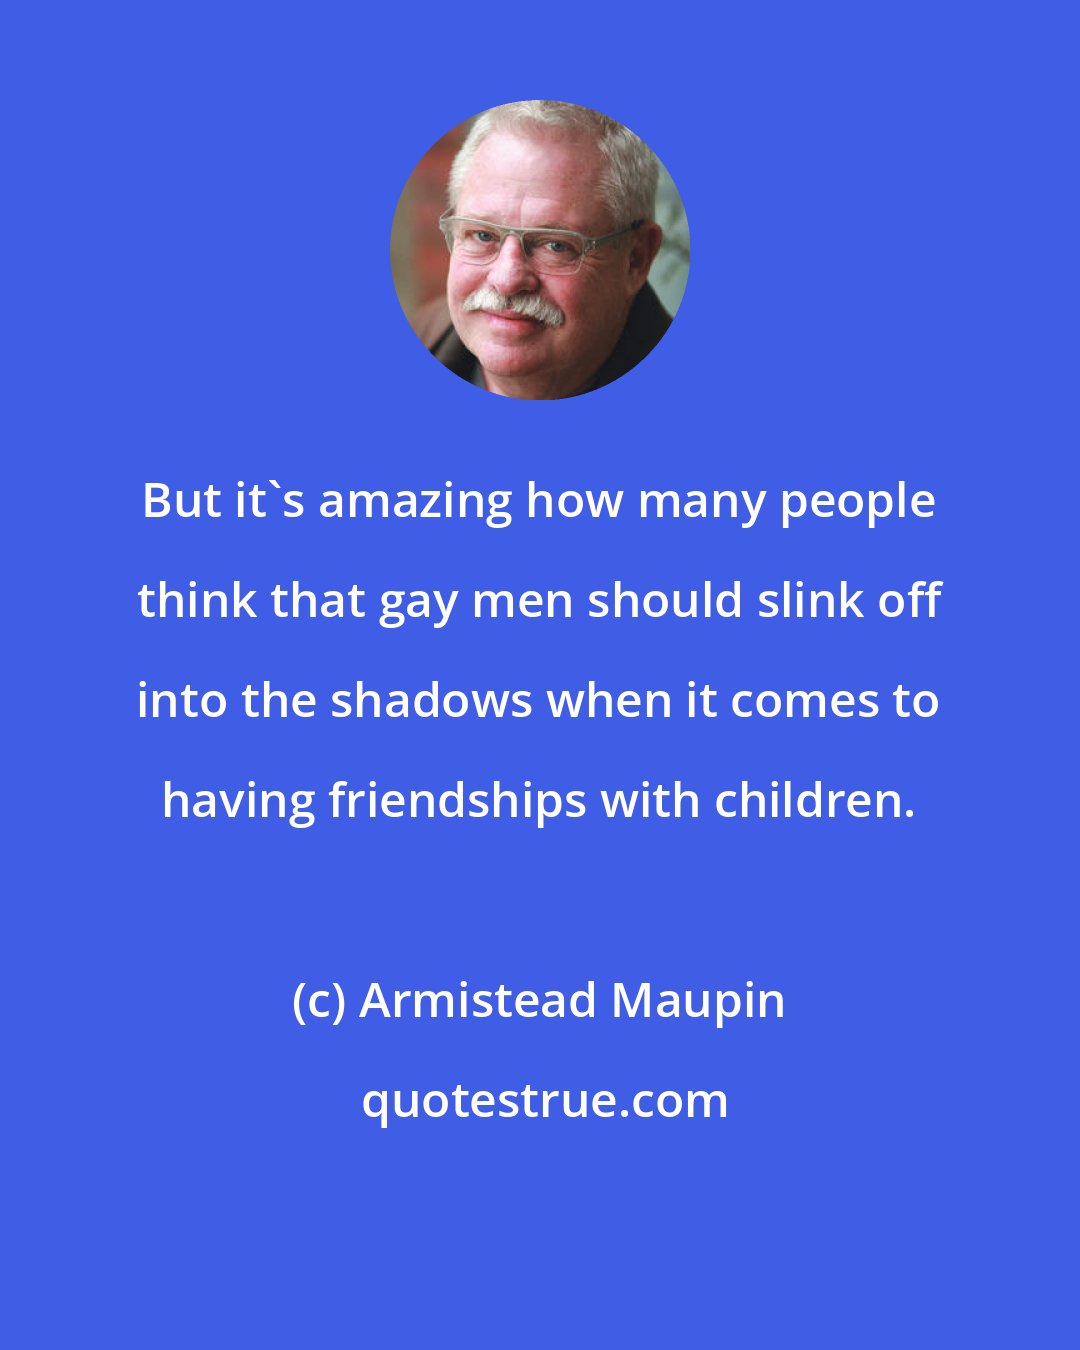 Armistead Maupin: But it's amazing how many people think that gay men should slink off into the shadows when it comes to having friendships with children.